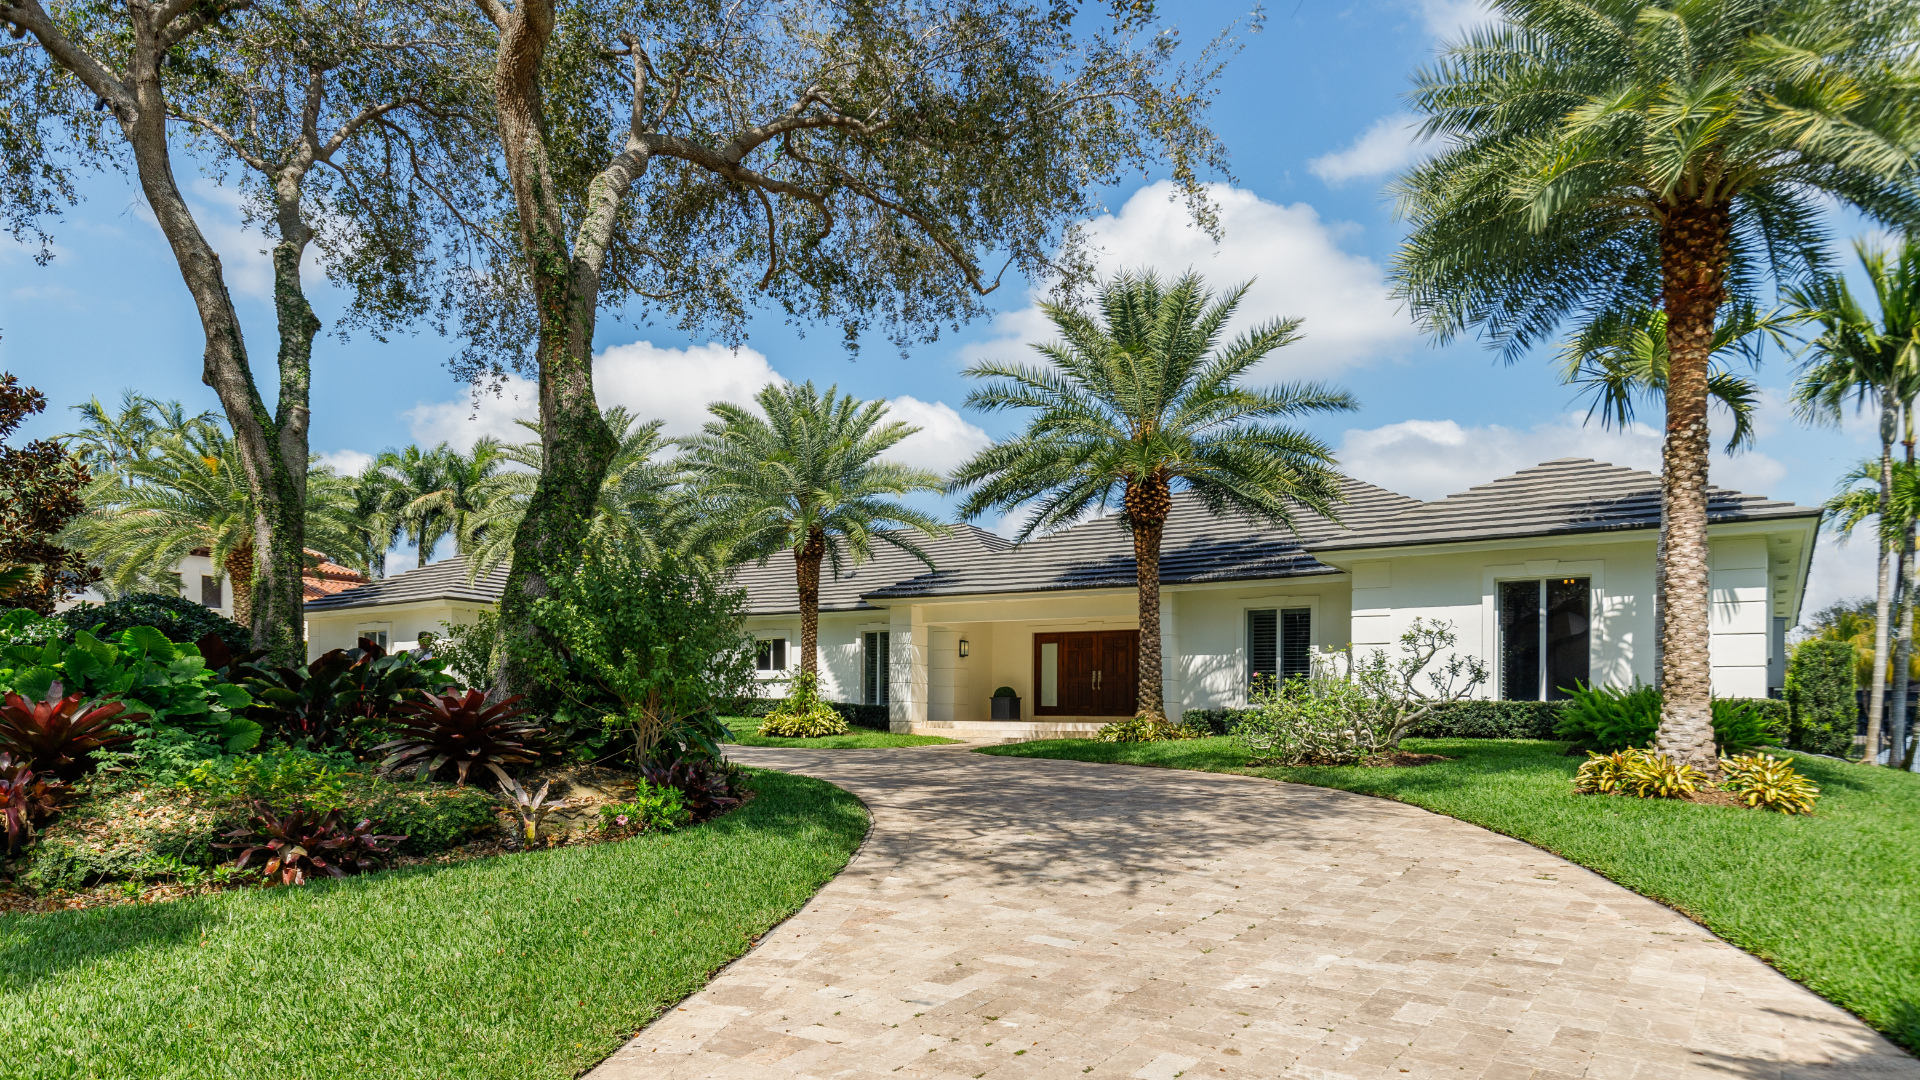 A one story white home surrounded by palm trees in Lithia, FL.